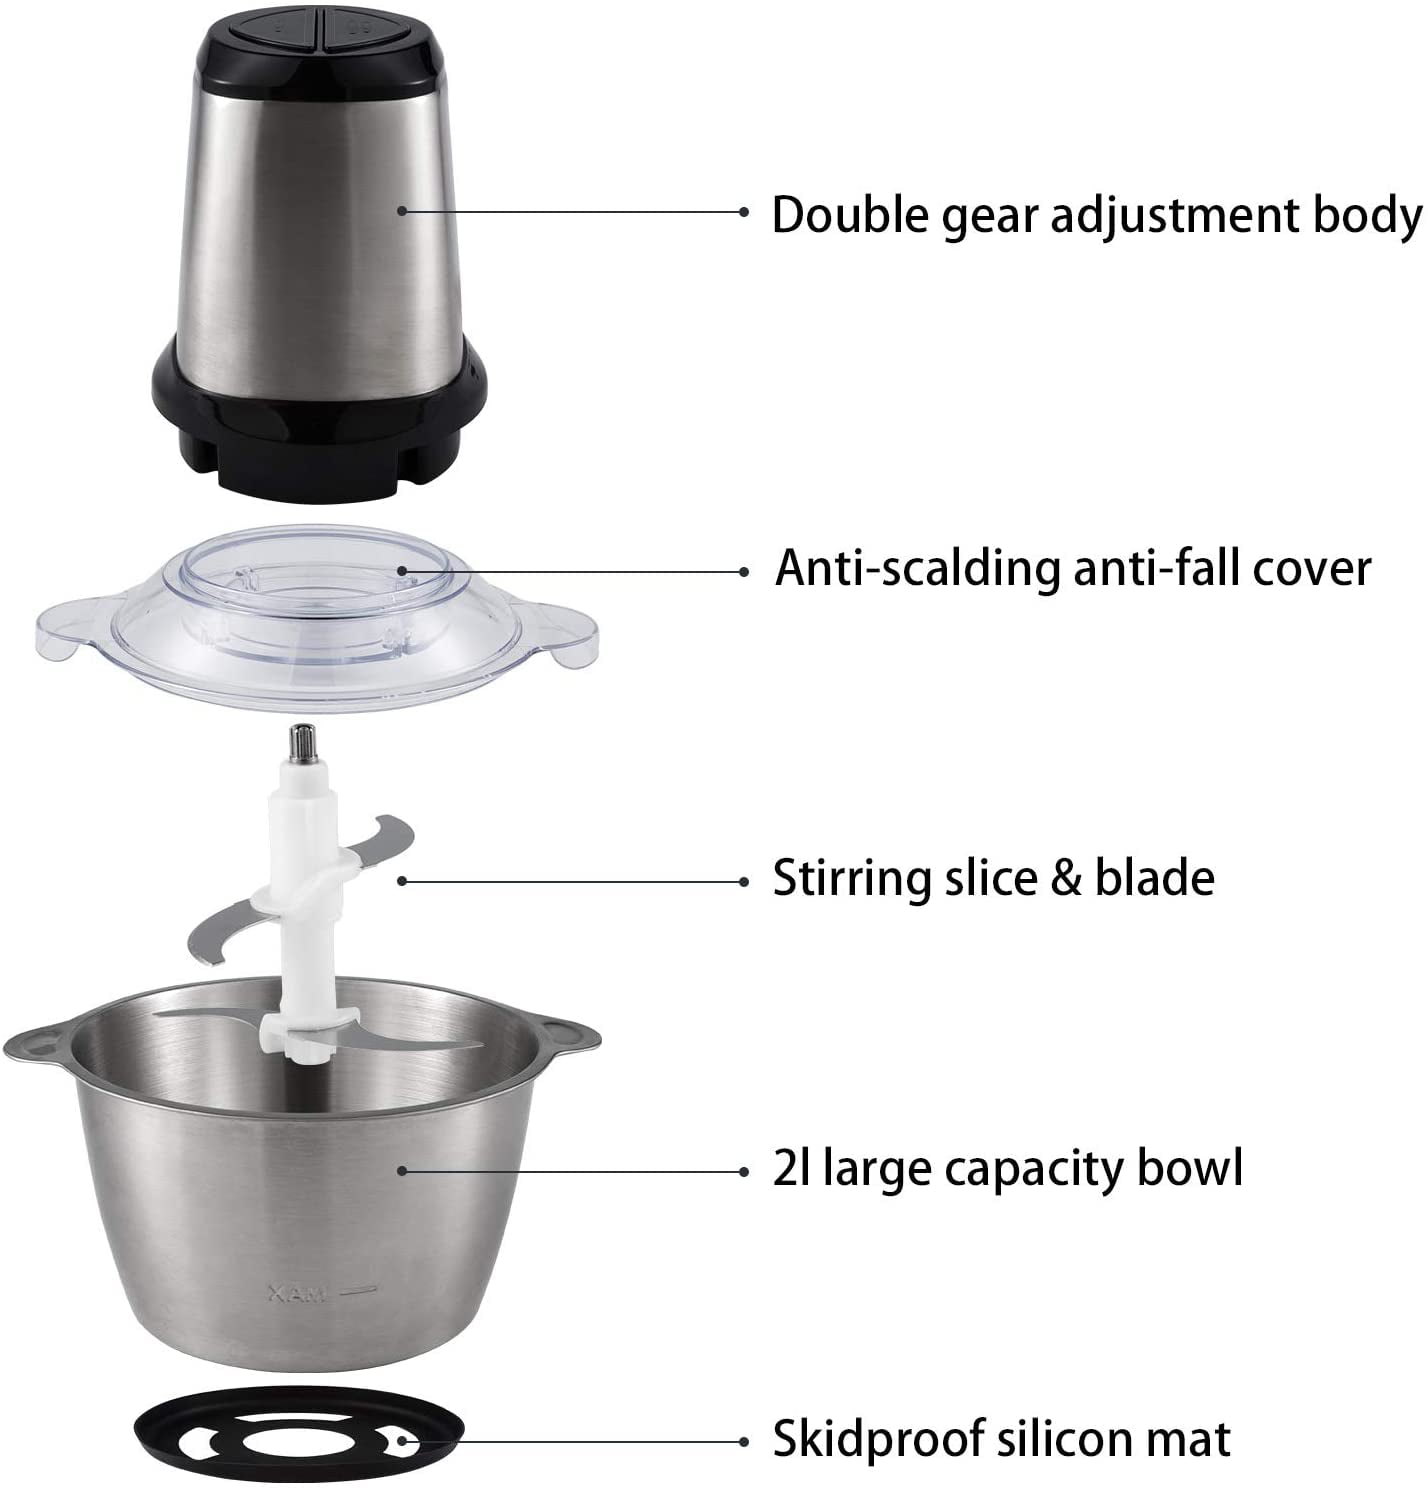 Narcissus Food Processor, 500W Electric Meat Grinder Food Chopper with Dual  Bowls - 12 Cup Glass & 12 Cup Stainless steel, 6-leaf S-blades Effective